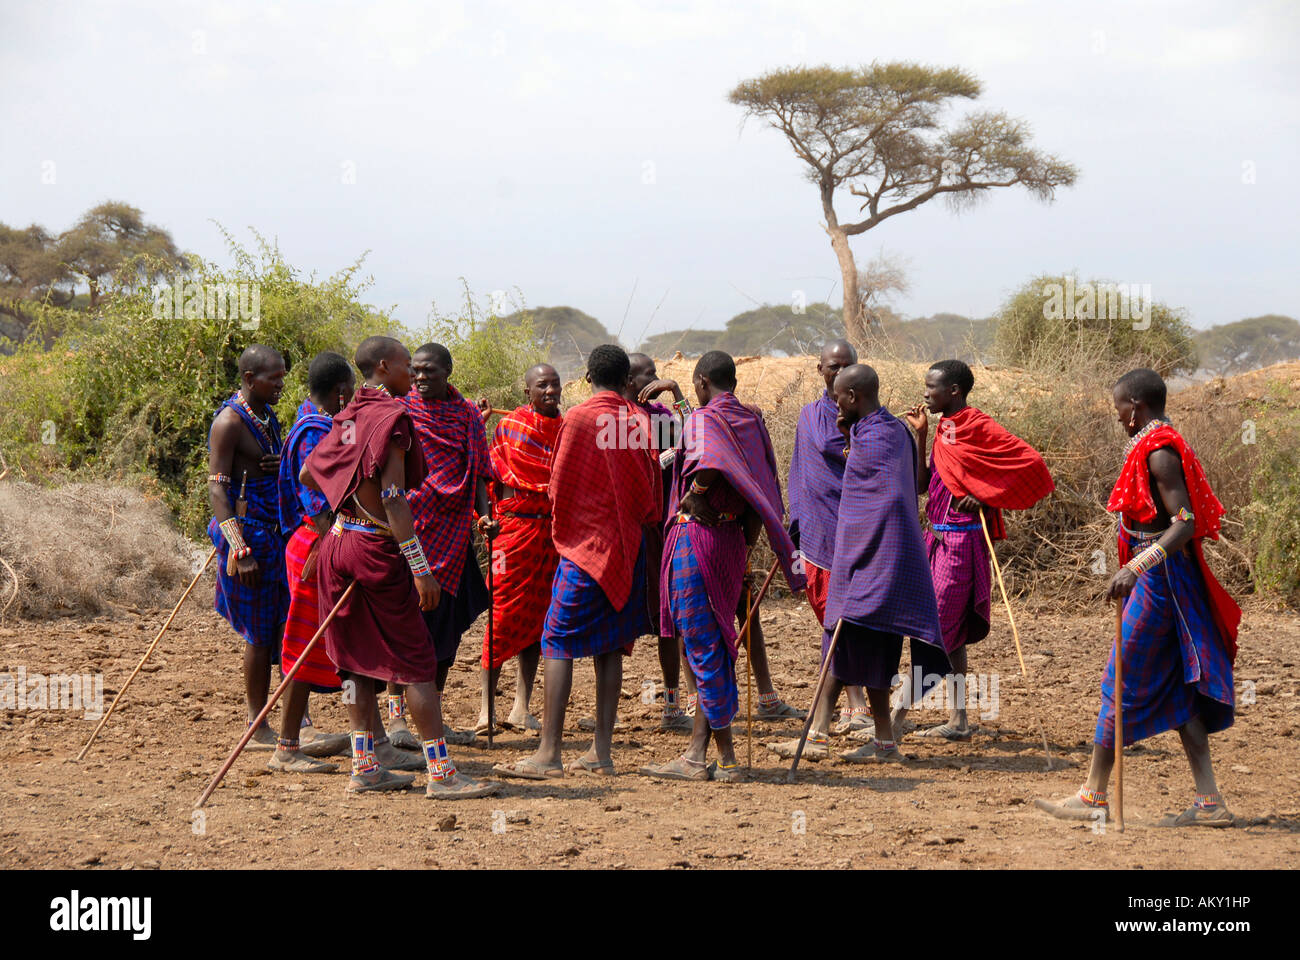 Masai men dressed in colourful capes are standing together in the savannah Amboseli National Park Kenya Stock Photo